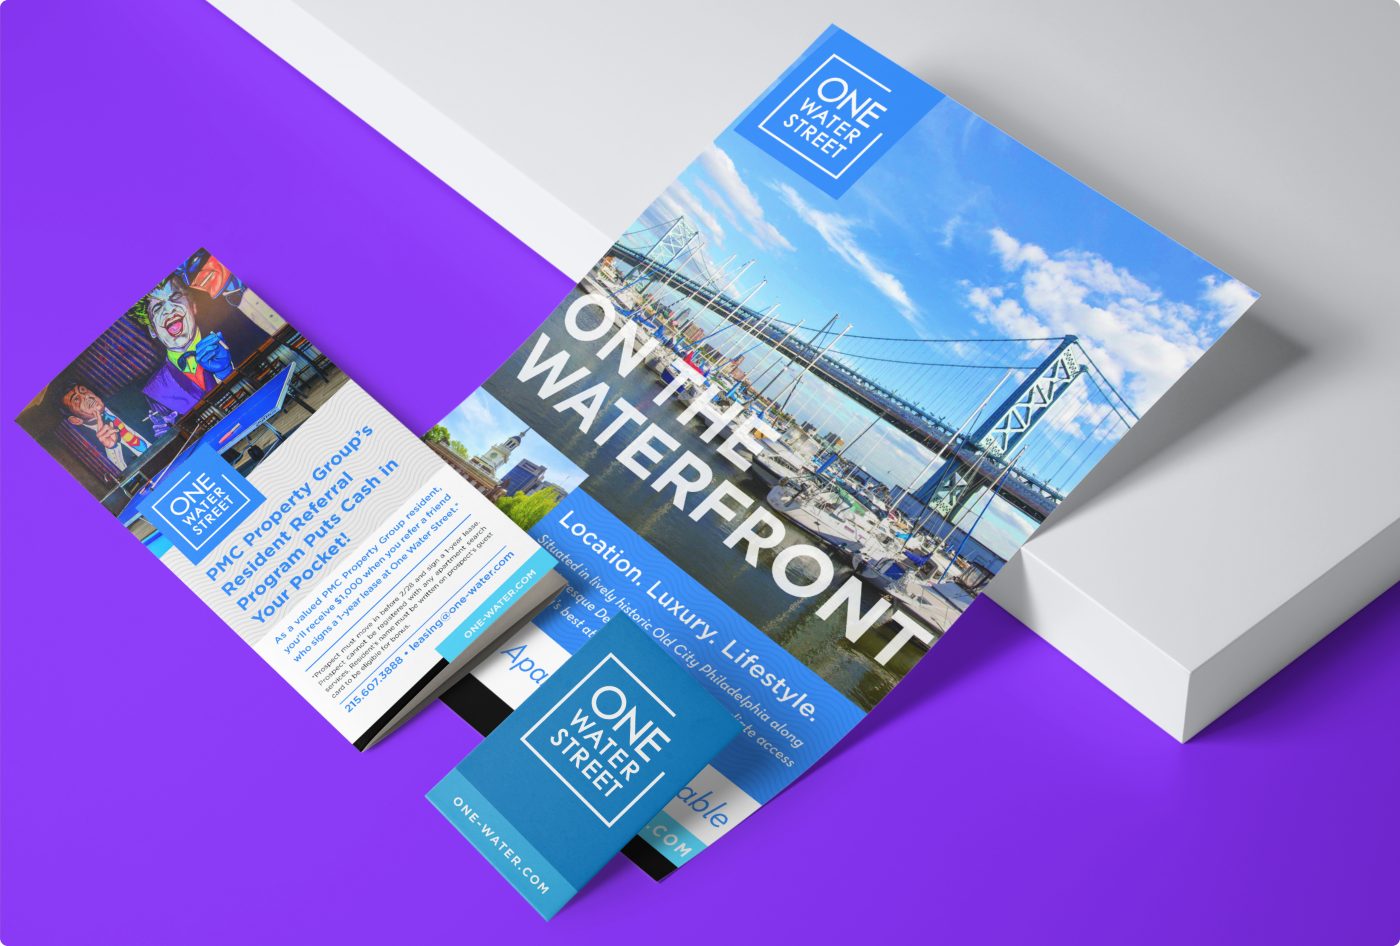 Rebranded print materials including a brochure, business card, and flyer for the One Water Street property.